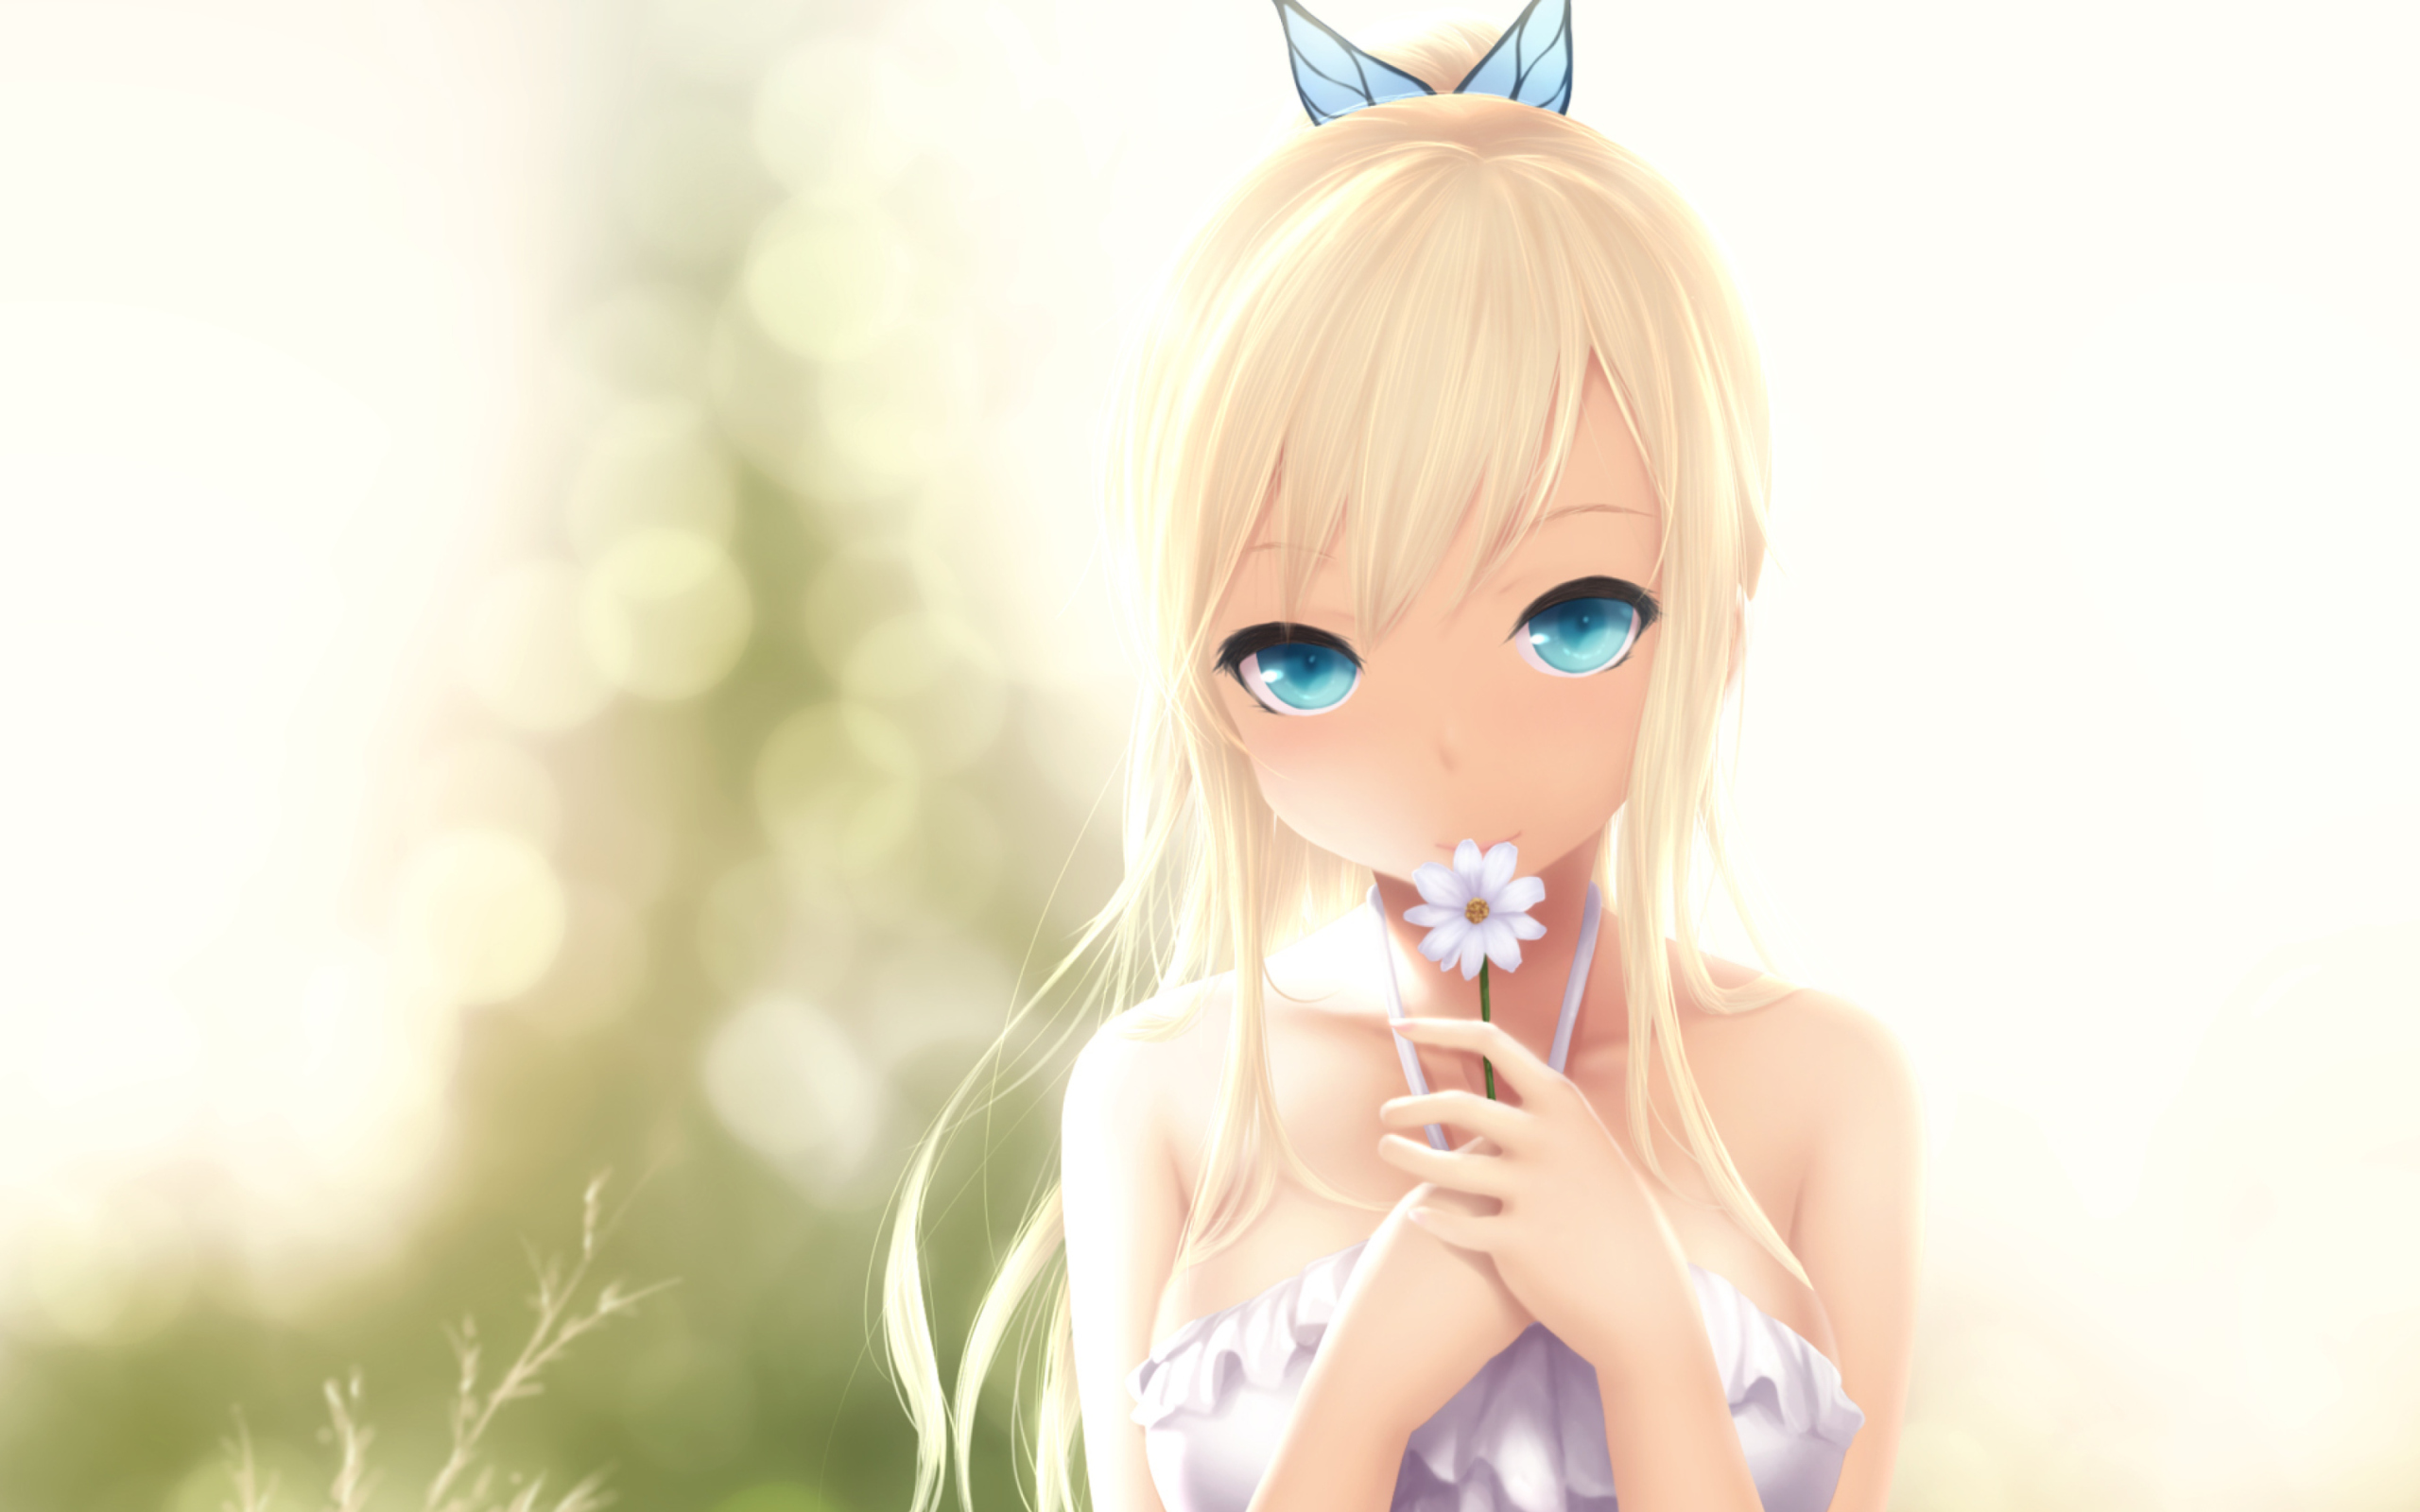 Das Anime Blonde With Daisy Wallpaper 2560x1600